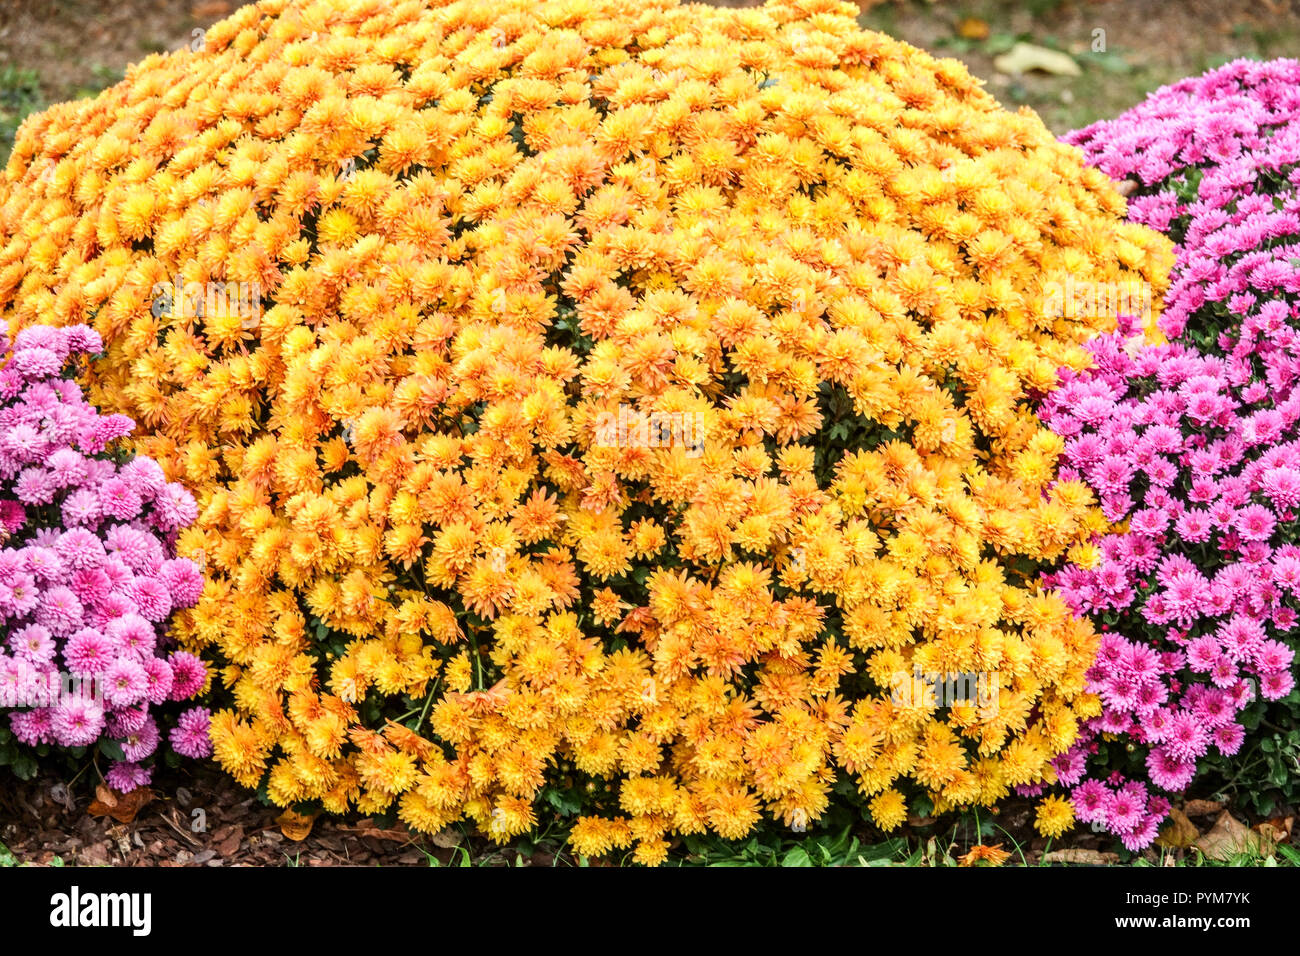 Autumnal garden with colorful Chrysanthemum flowers, contrast, mums colorful garden bed Stock Photo